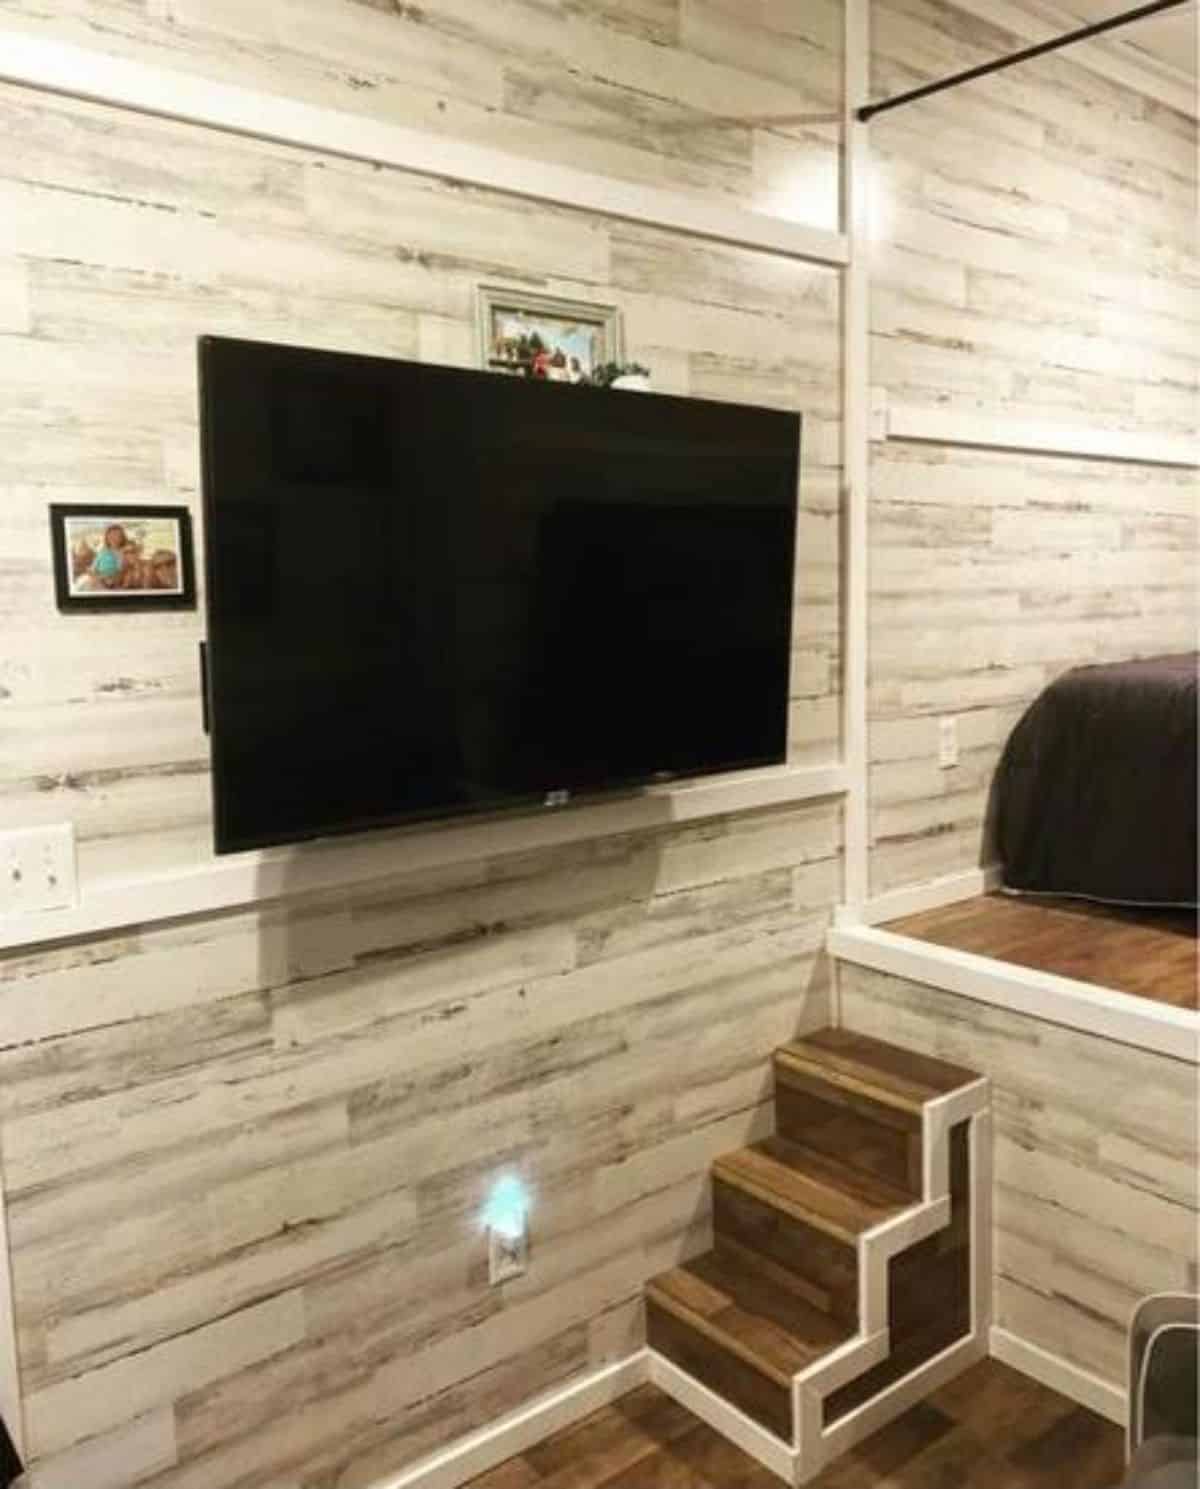 Wall mounted television set opposite to chair in living area